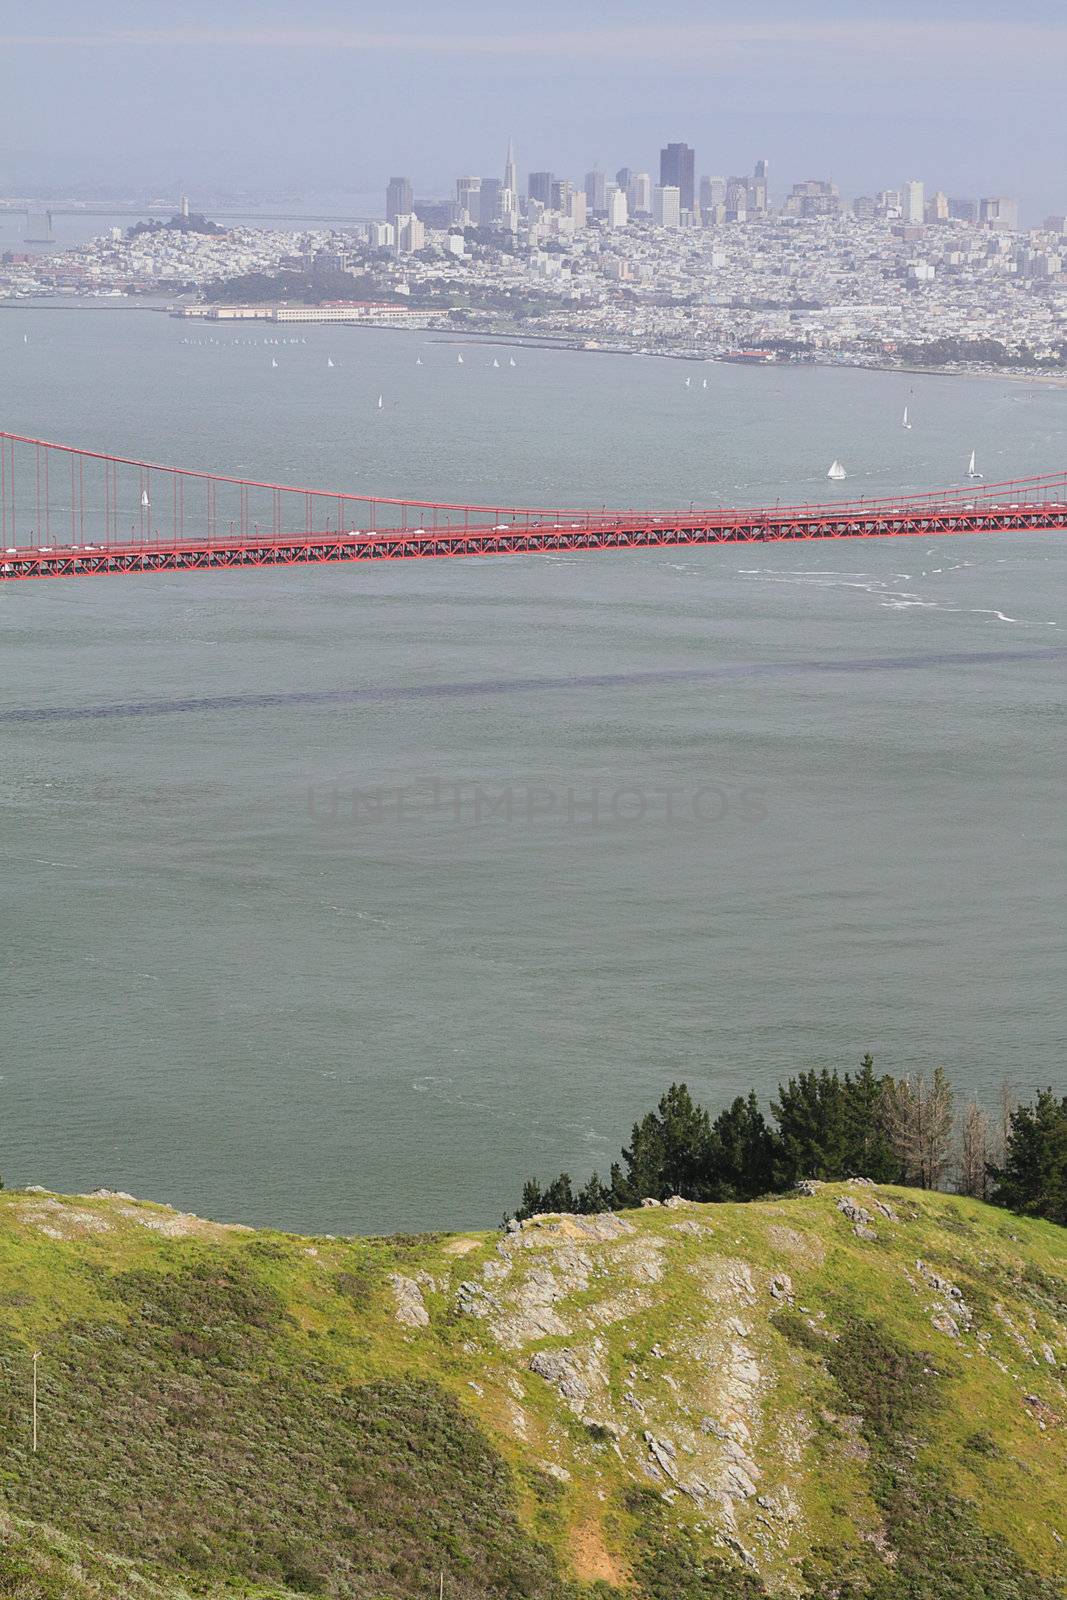 Golden Gate Bridge, San Francisco, with a hill on foreground